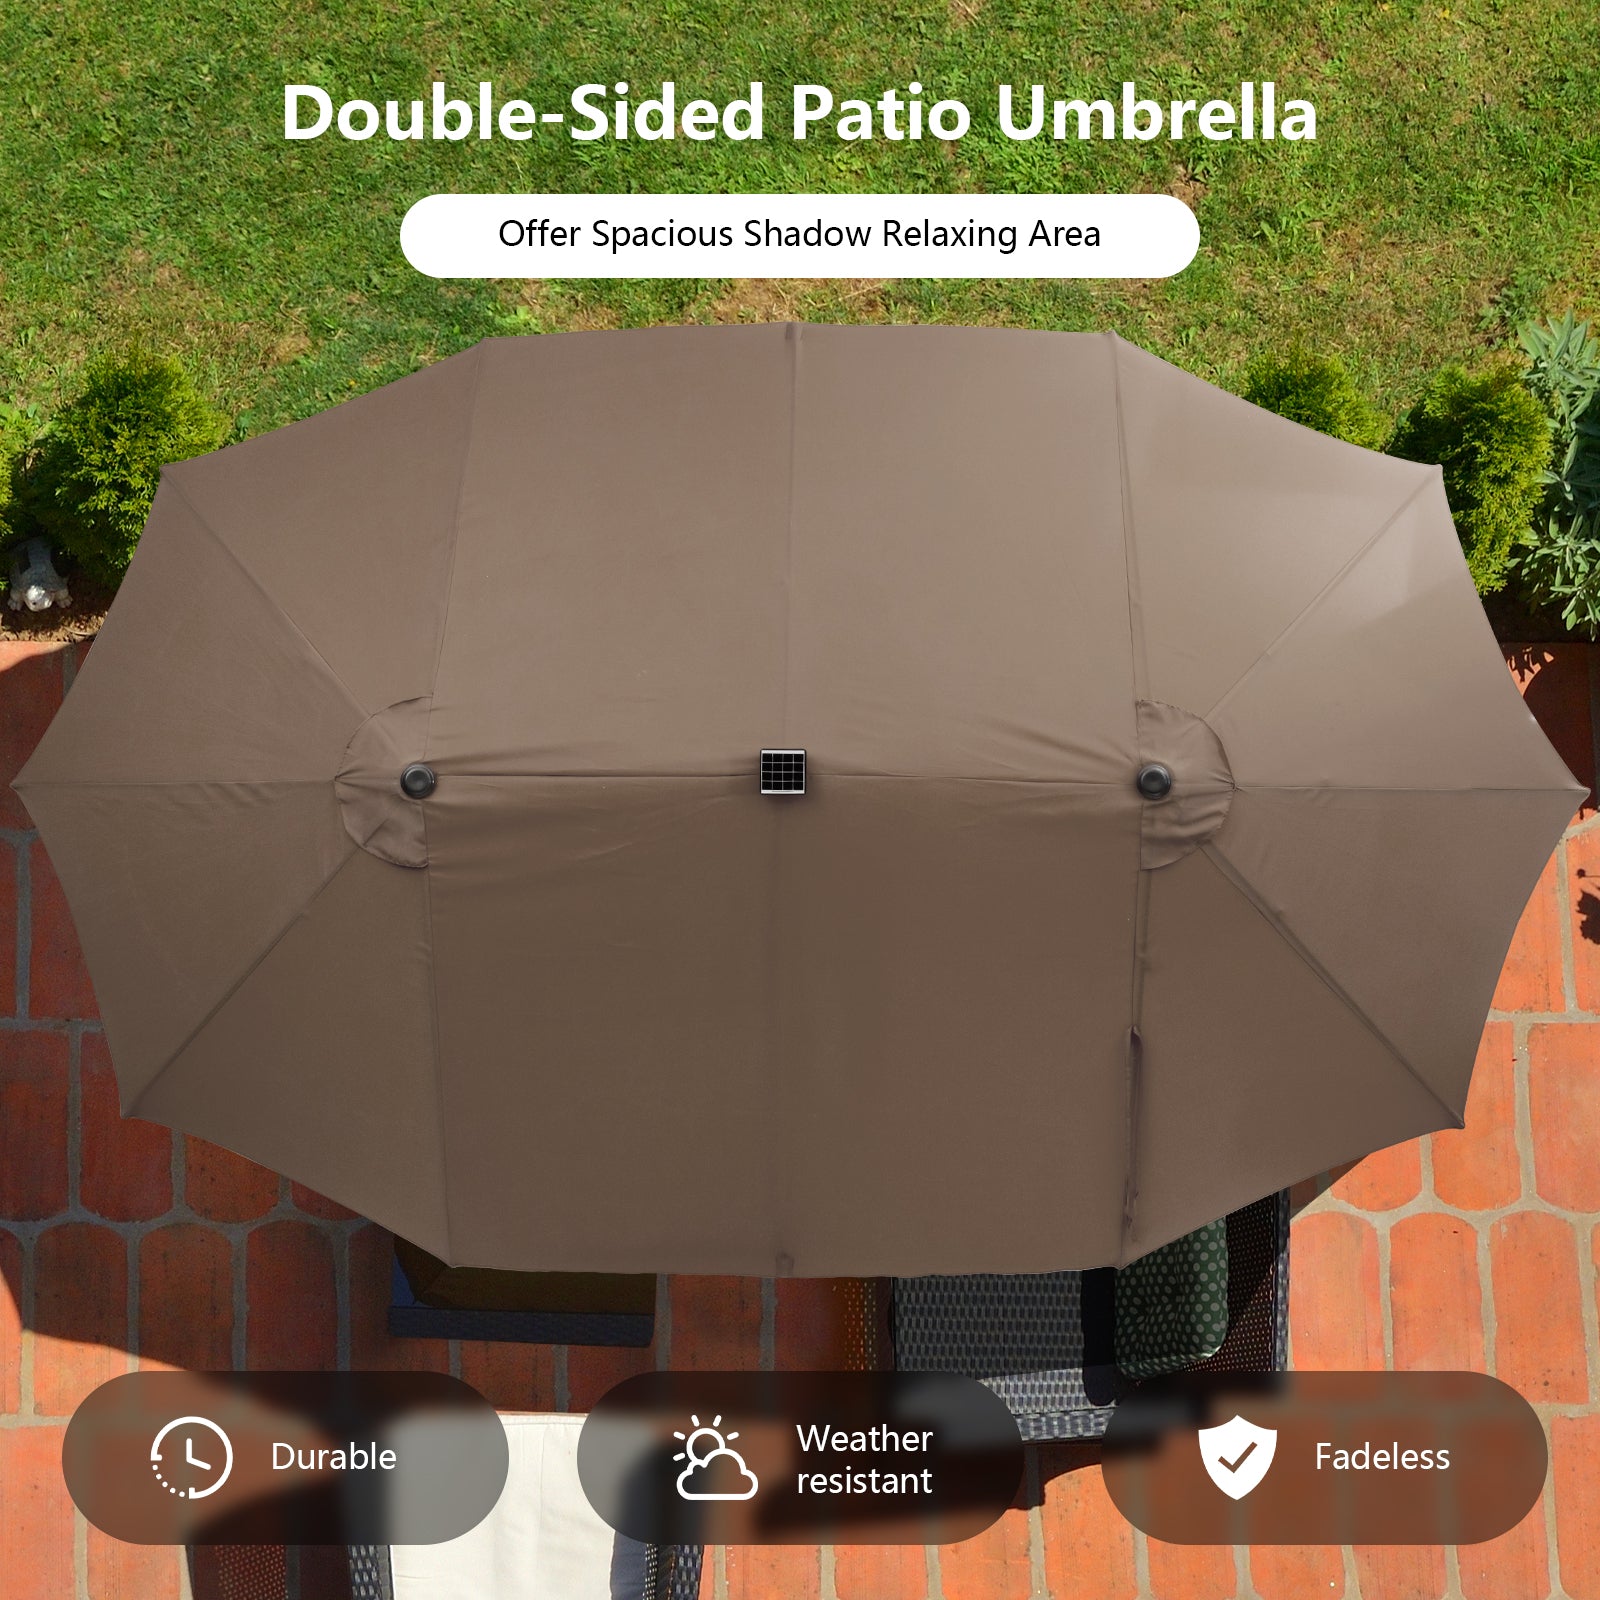 Hikidspace 15 Feet Double-Sided Patio Umbrella with 48 LED Lights